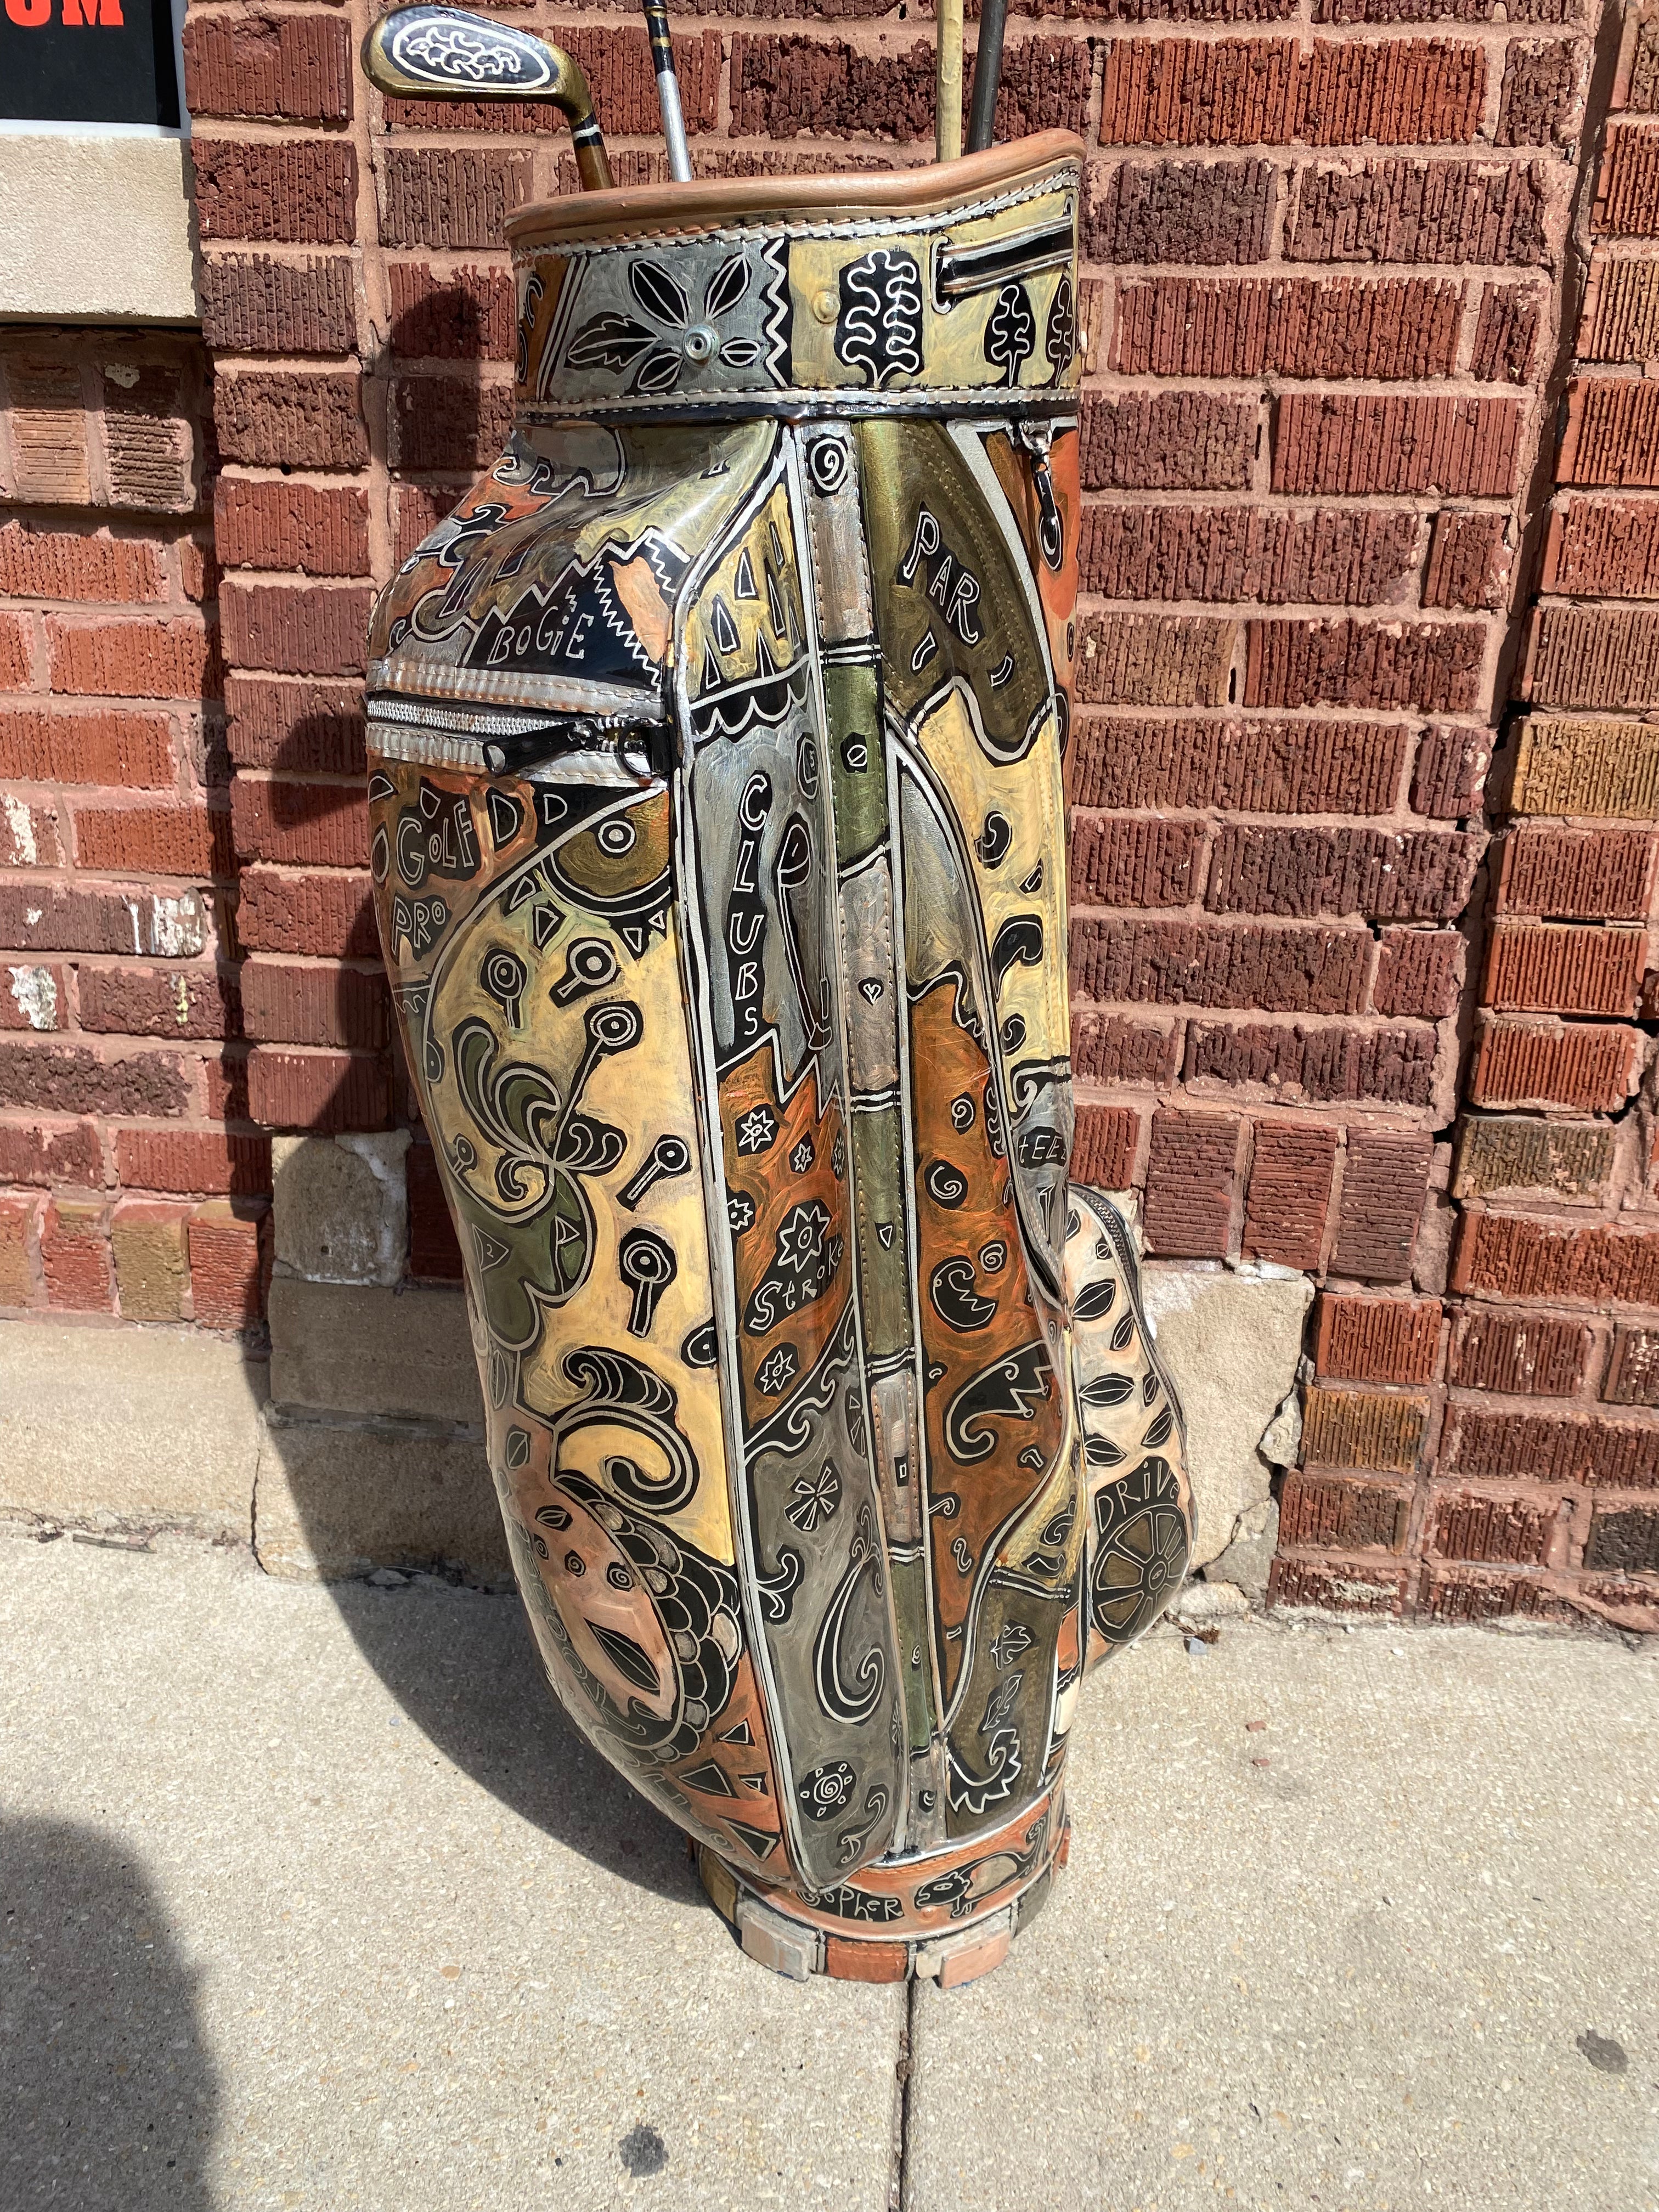 Painted Ajay Designer Golf Bag & Four Painted Golf Clubs signed by Artist, Rokoko